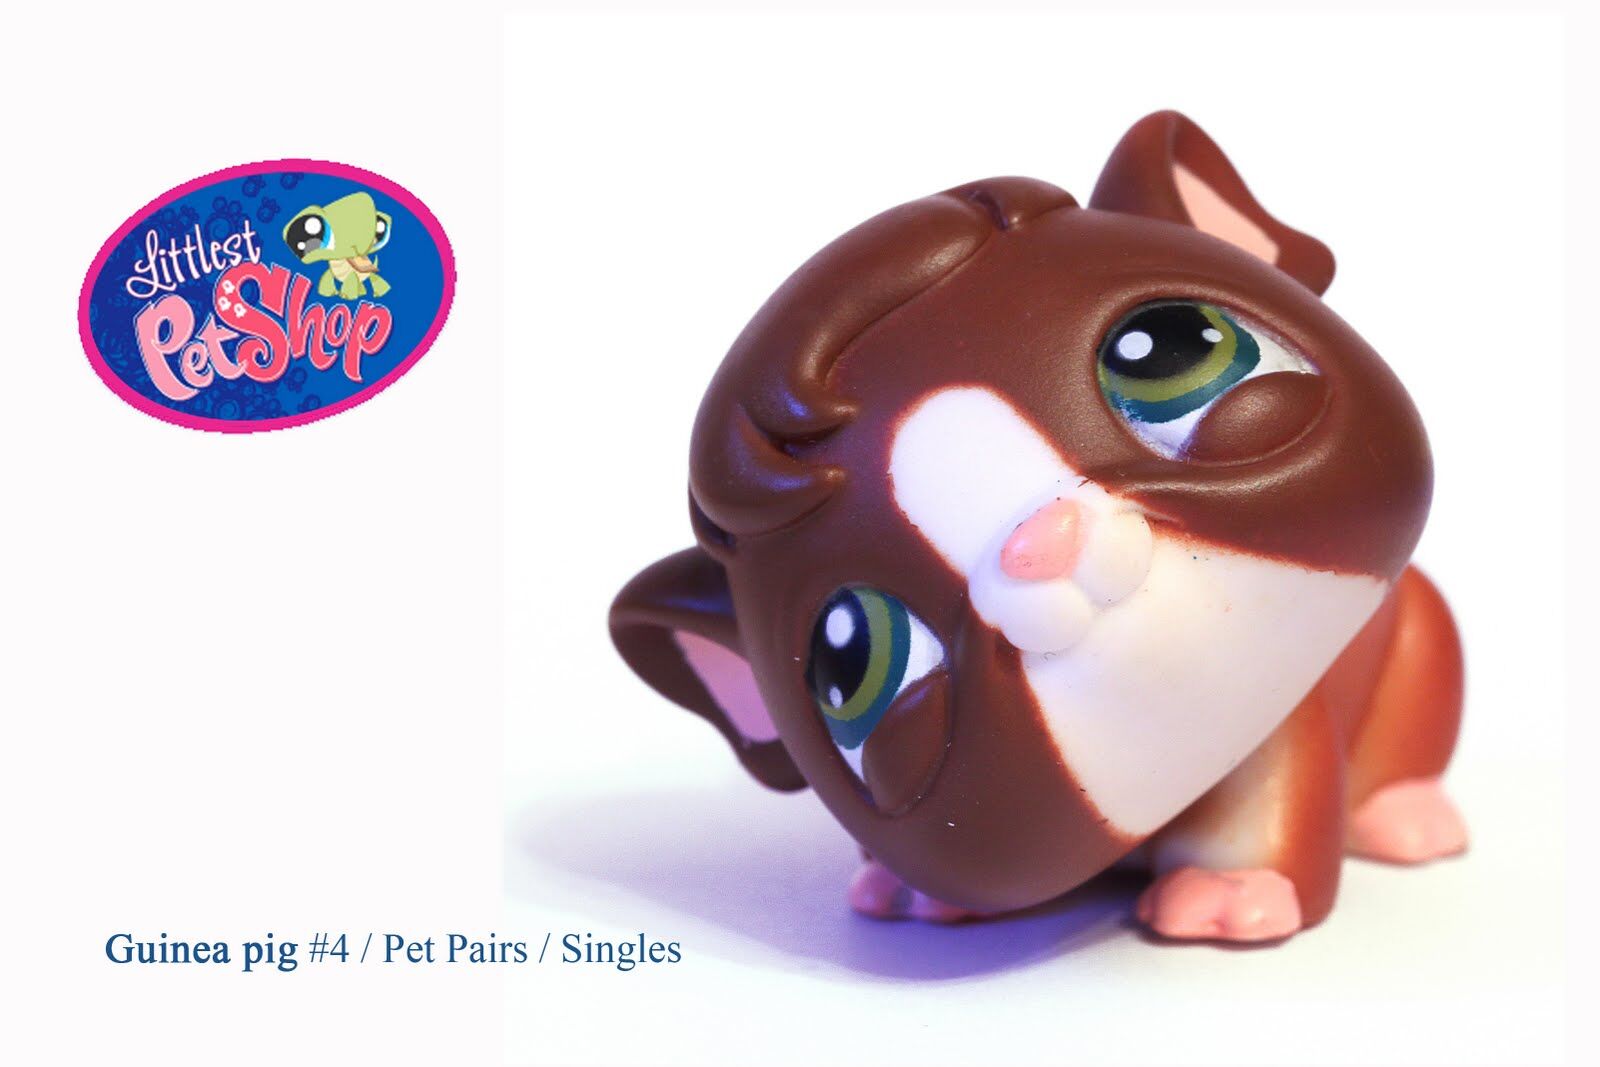 https://static.wikia.nocookie.net/littlestpetshoplps/images/e/e5/Littlest_Pet_Shop_-4.jpg/revision/latest/scale-to-width-down/1600?cb=20120124003558